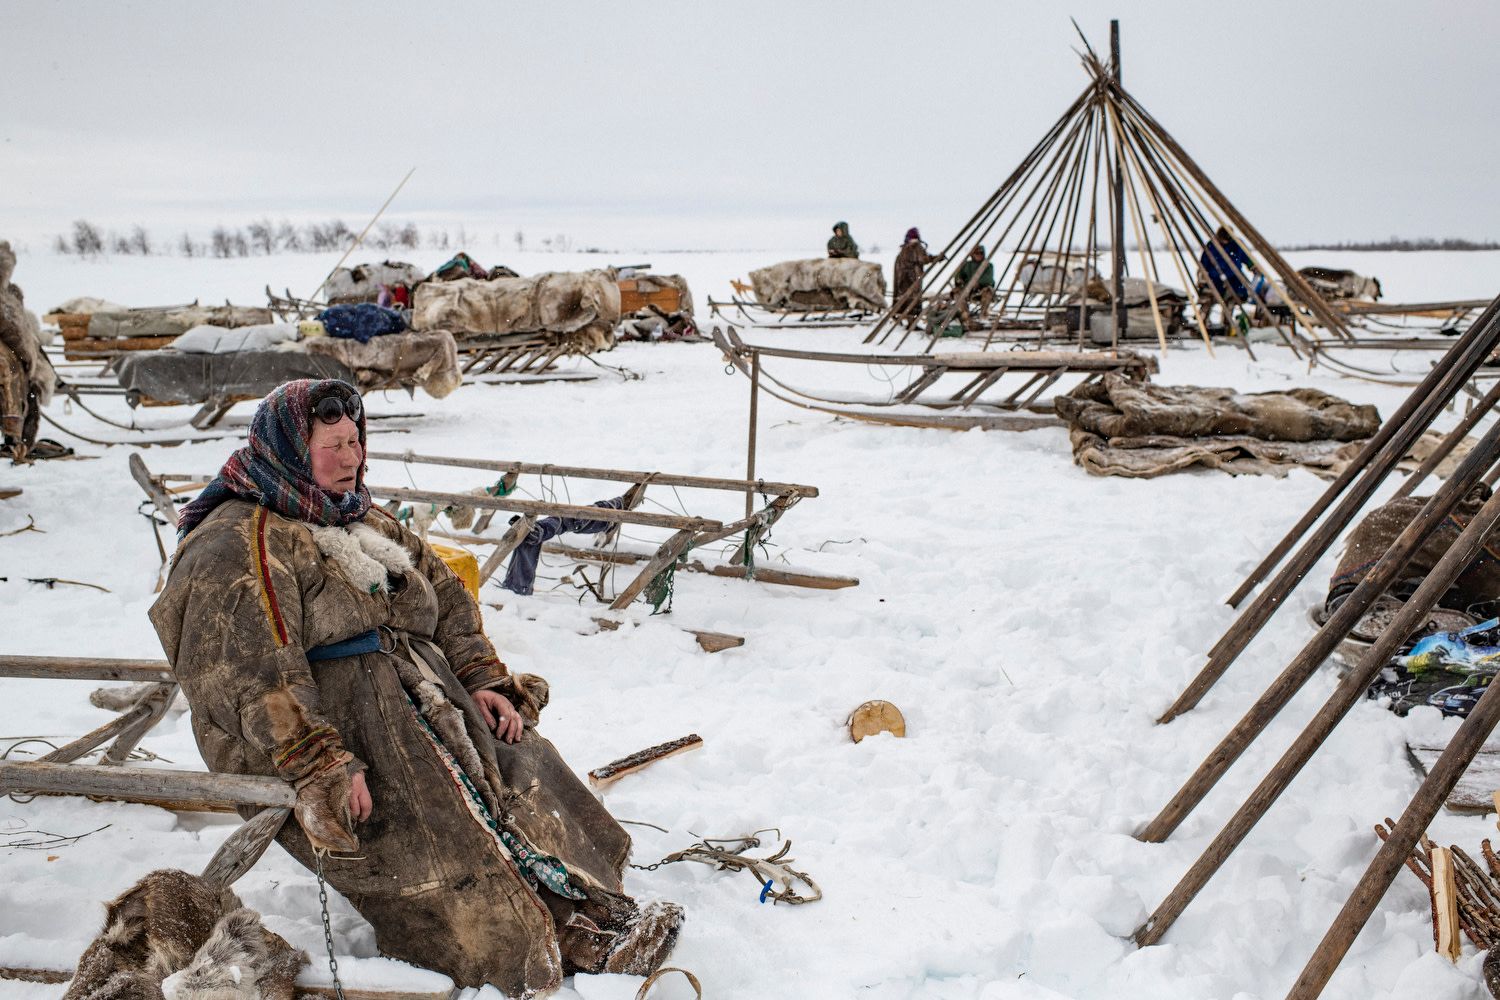 Yamal Peninsula, Yamalo-Nenets Autonomous Okrug, Russia, April 2018. An old woman from the Serotetto family takes a break after setting up her chum, a conical-shaped tent made of reindeer skins laid over a skeleton of long wooden poles. Each year, the Nenets people and their reindeers travel over a thousand kilometers.